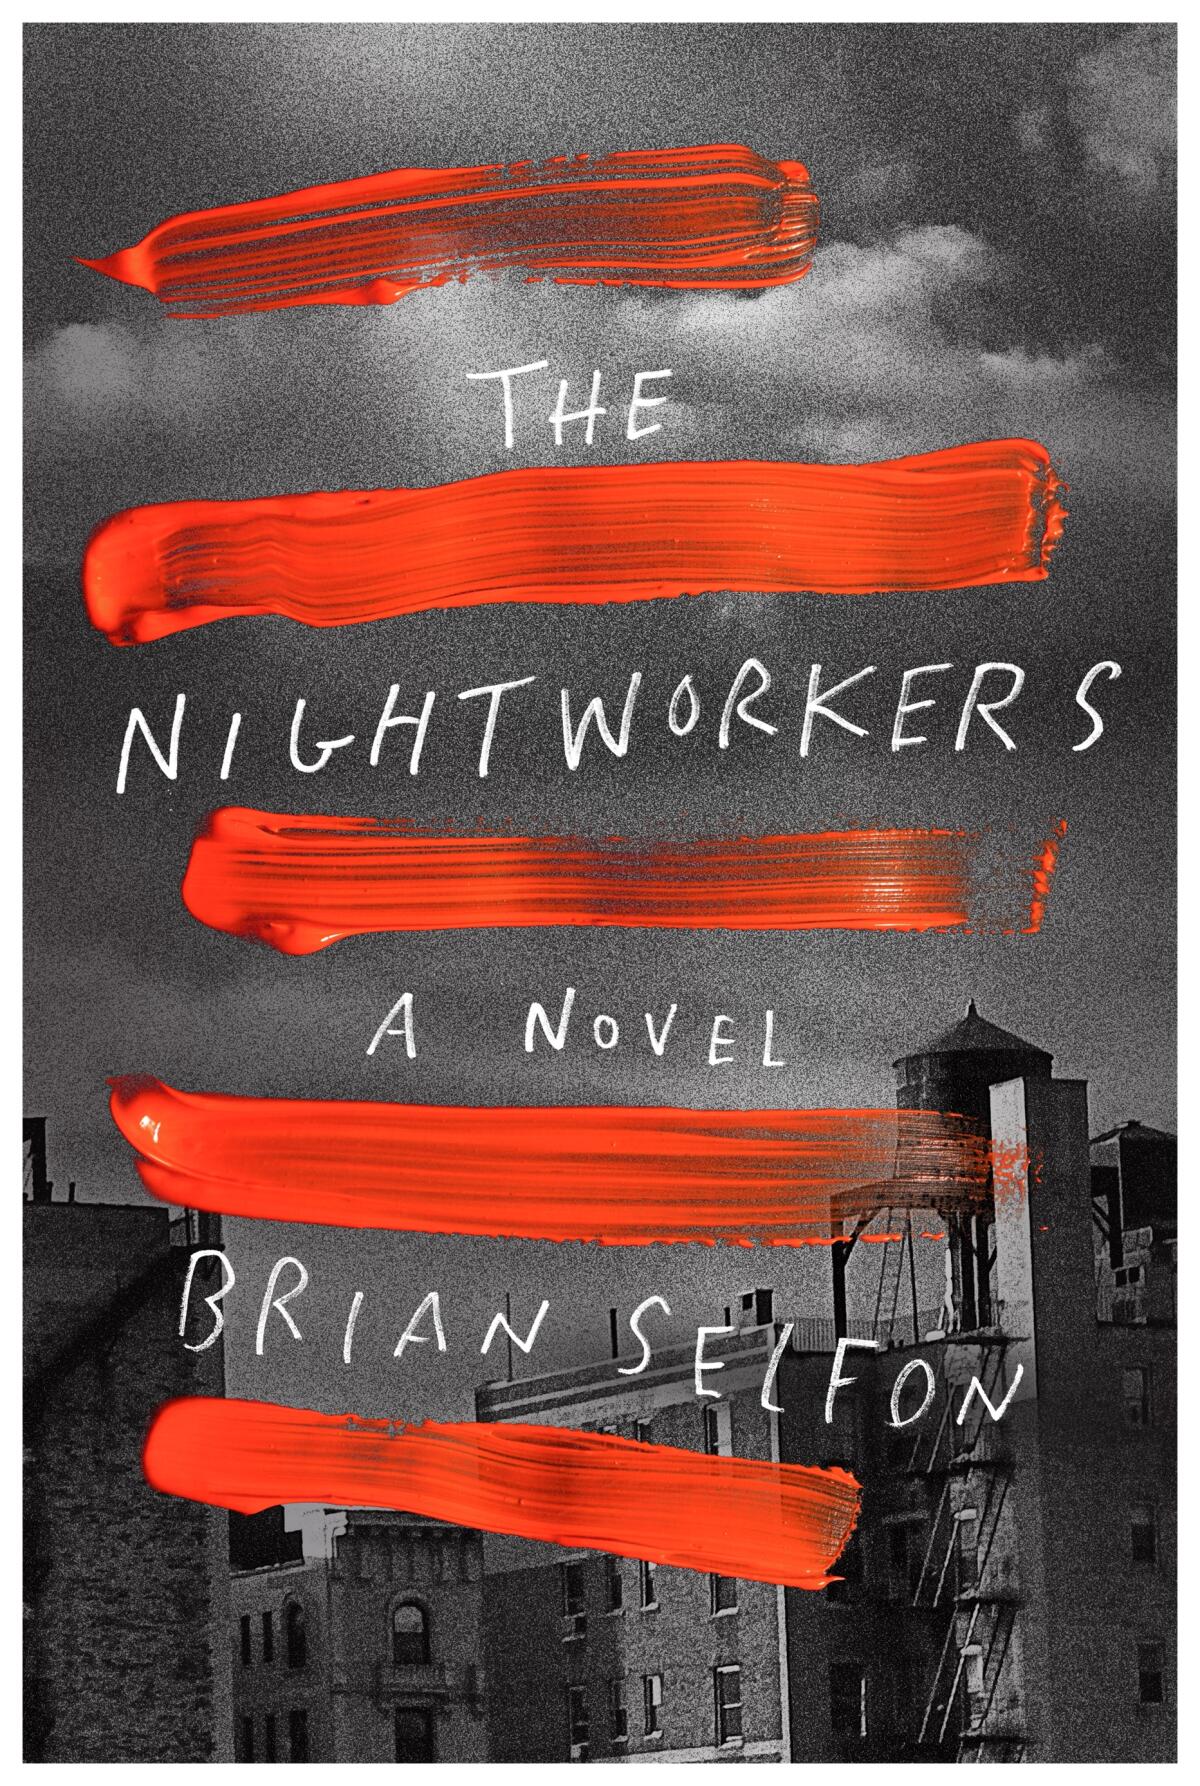 book cover of "The Nightworkers" by Brian Selfon